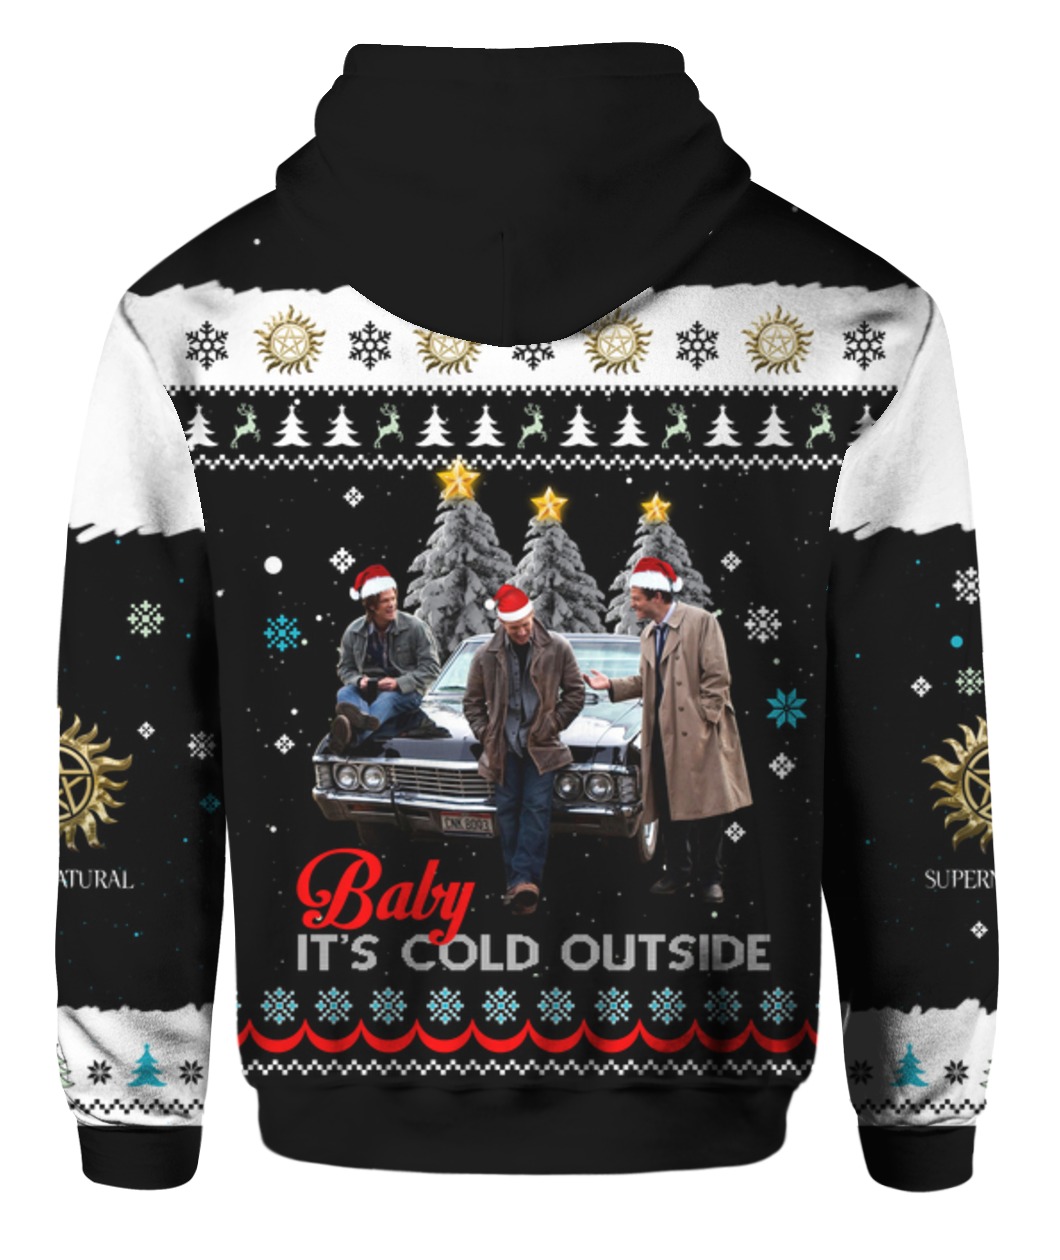 Supernatural baby it's cold outside ugly christmas zip hoodie - back